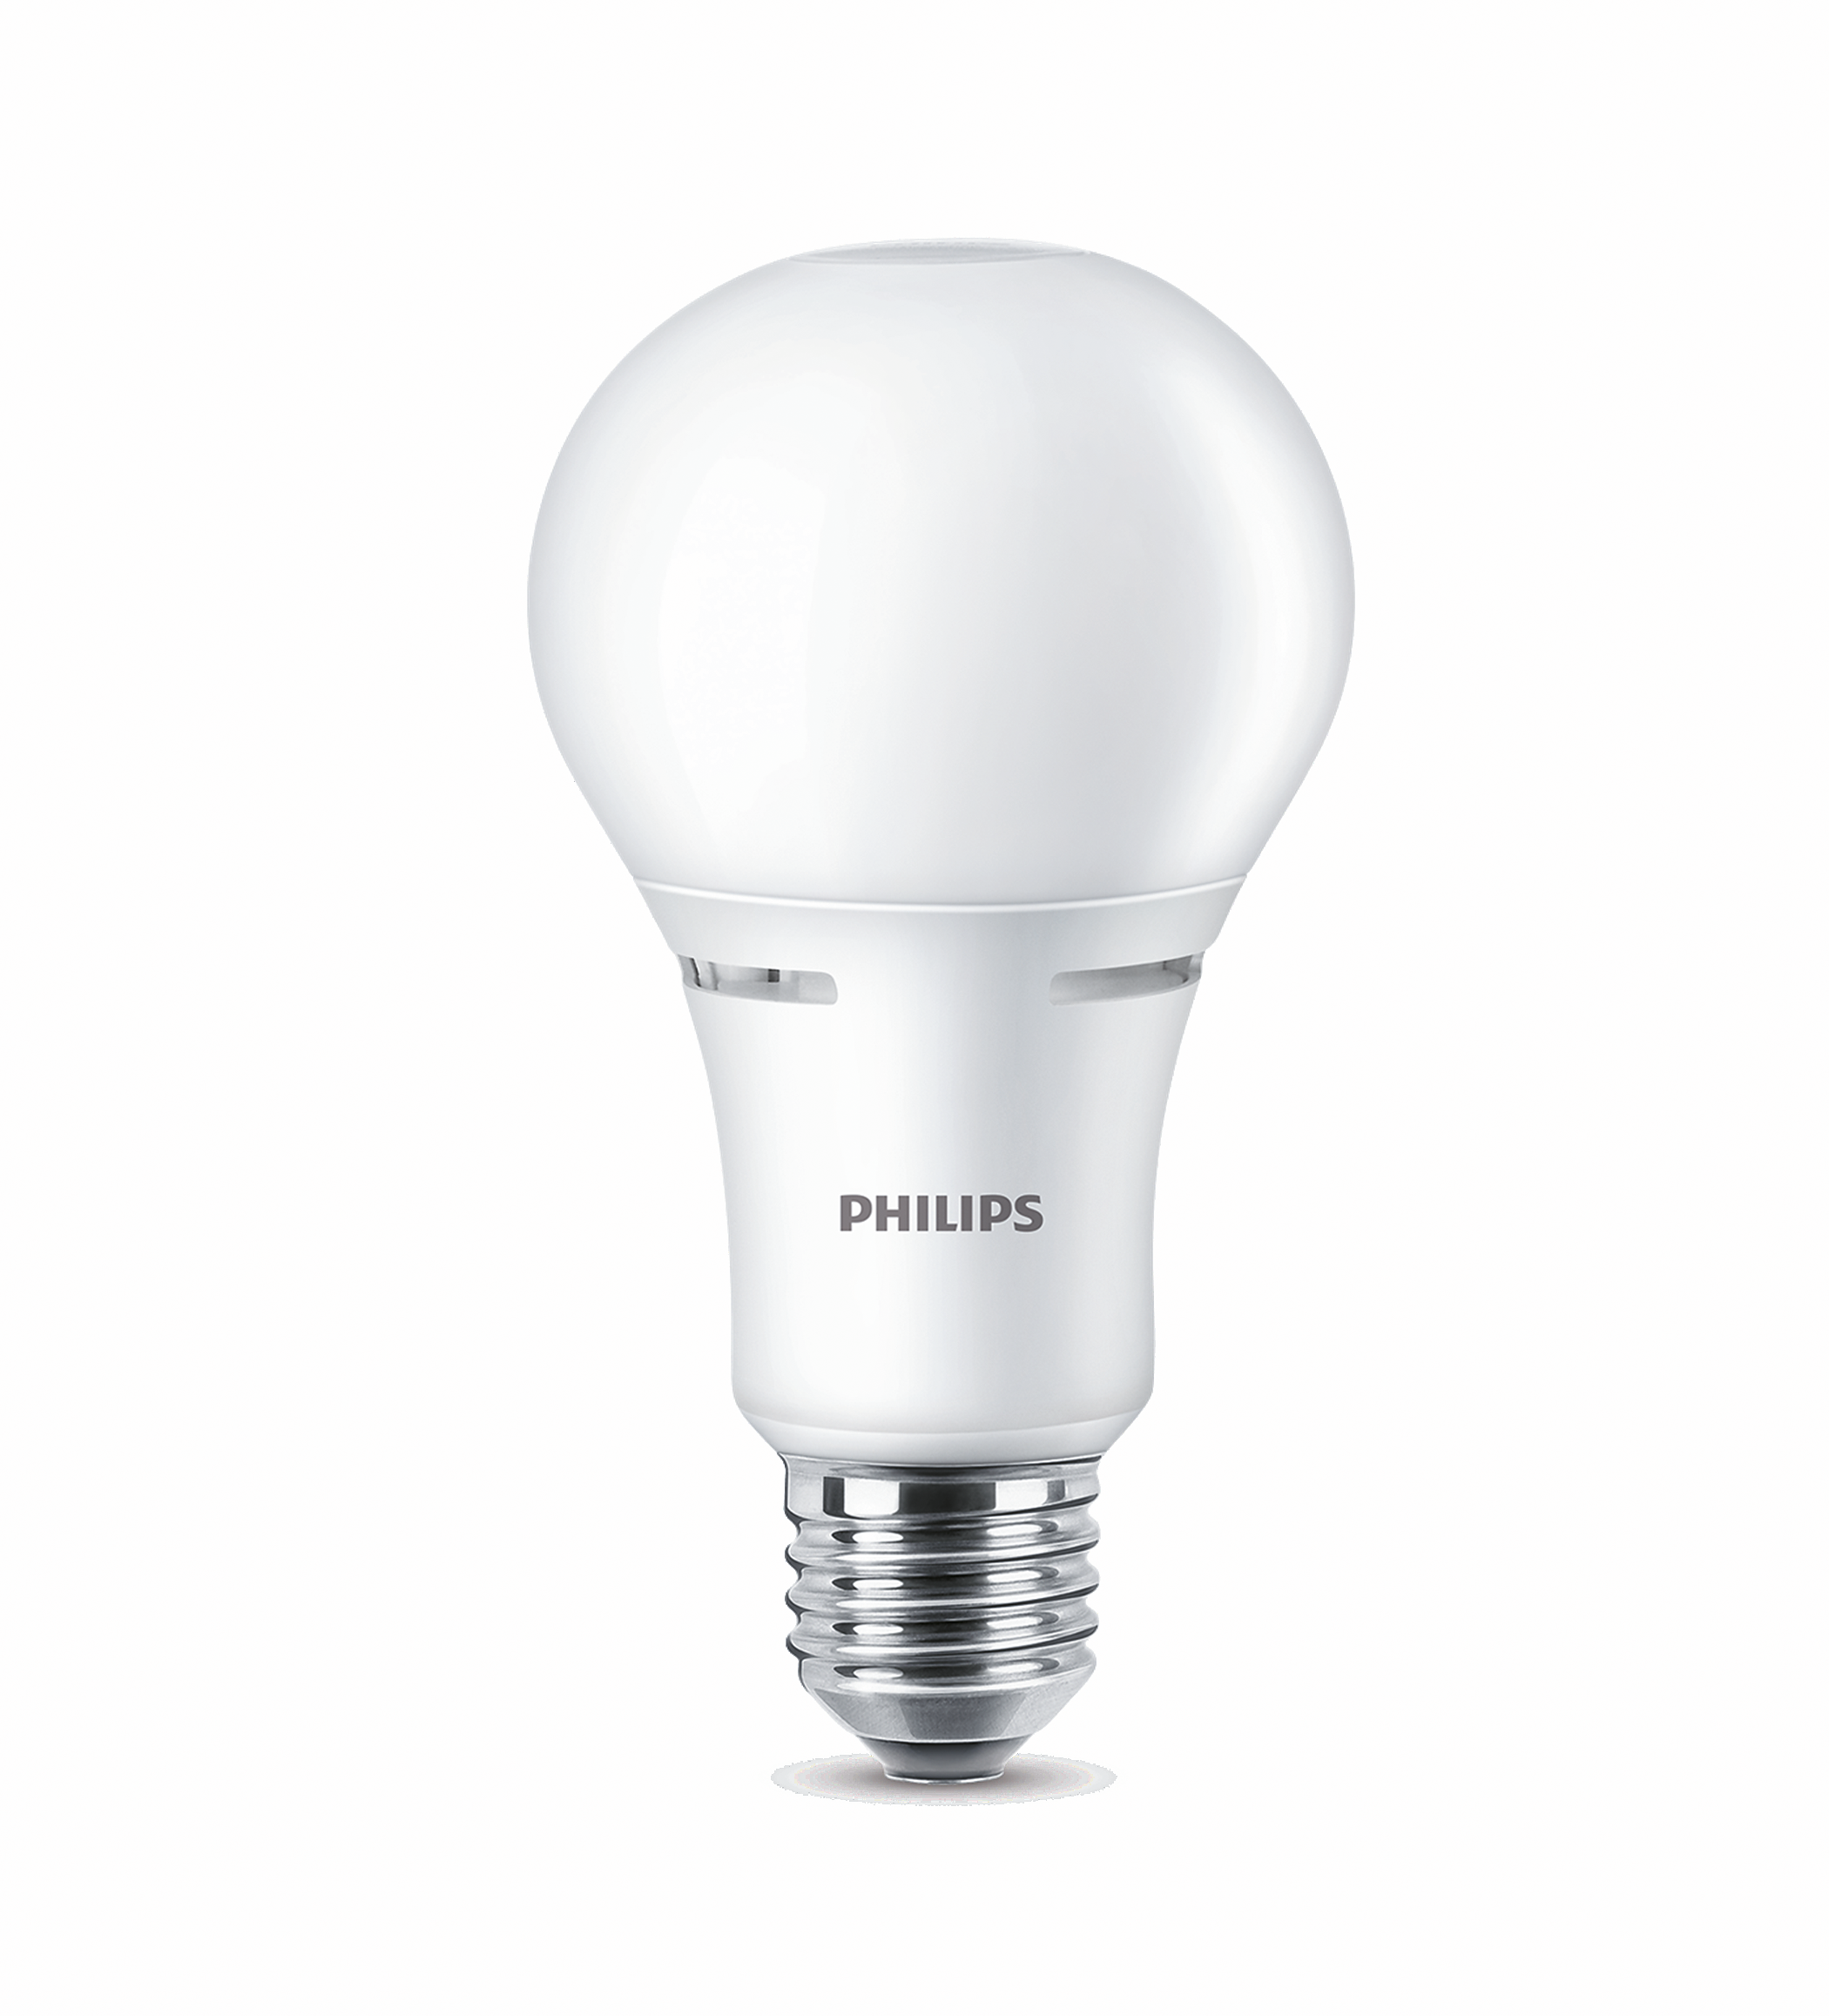 Led 3 Way 7403332 Philips, Do You Have To Use A 3 Way Bulb In Lamp